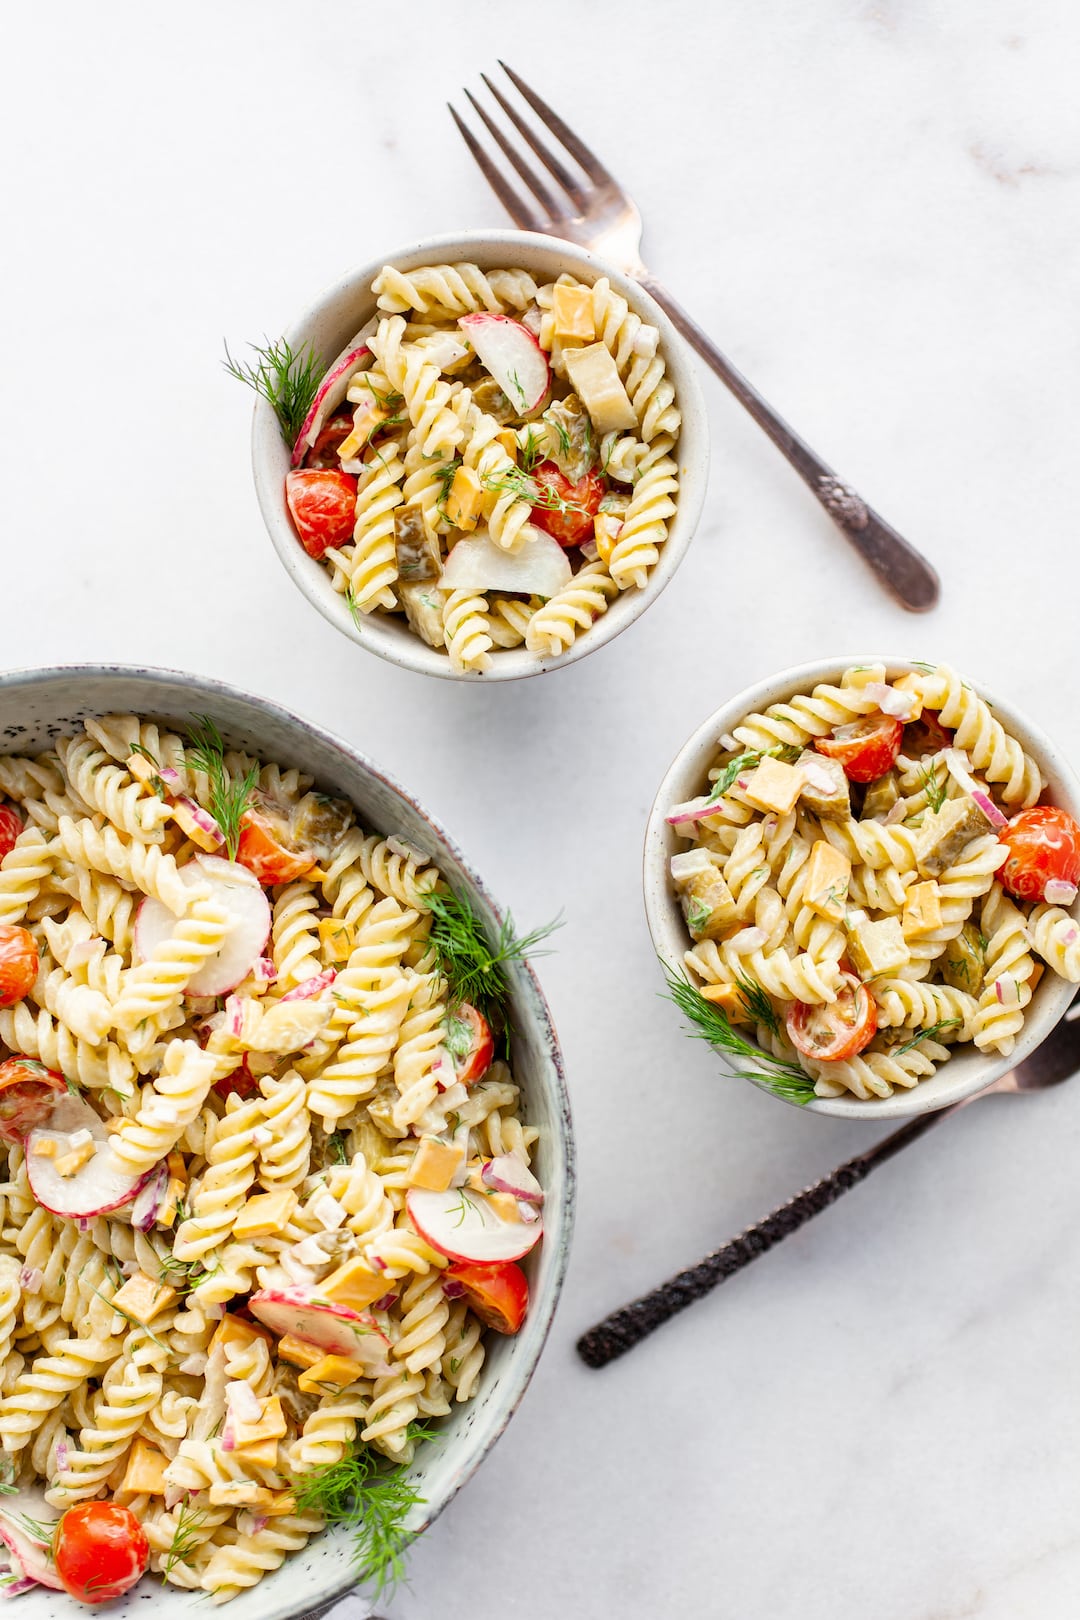 Perfect Healthy Dill Pickle Pasta Salad